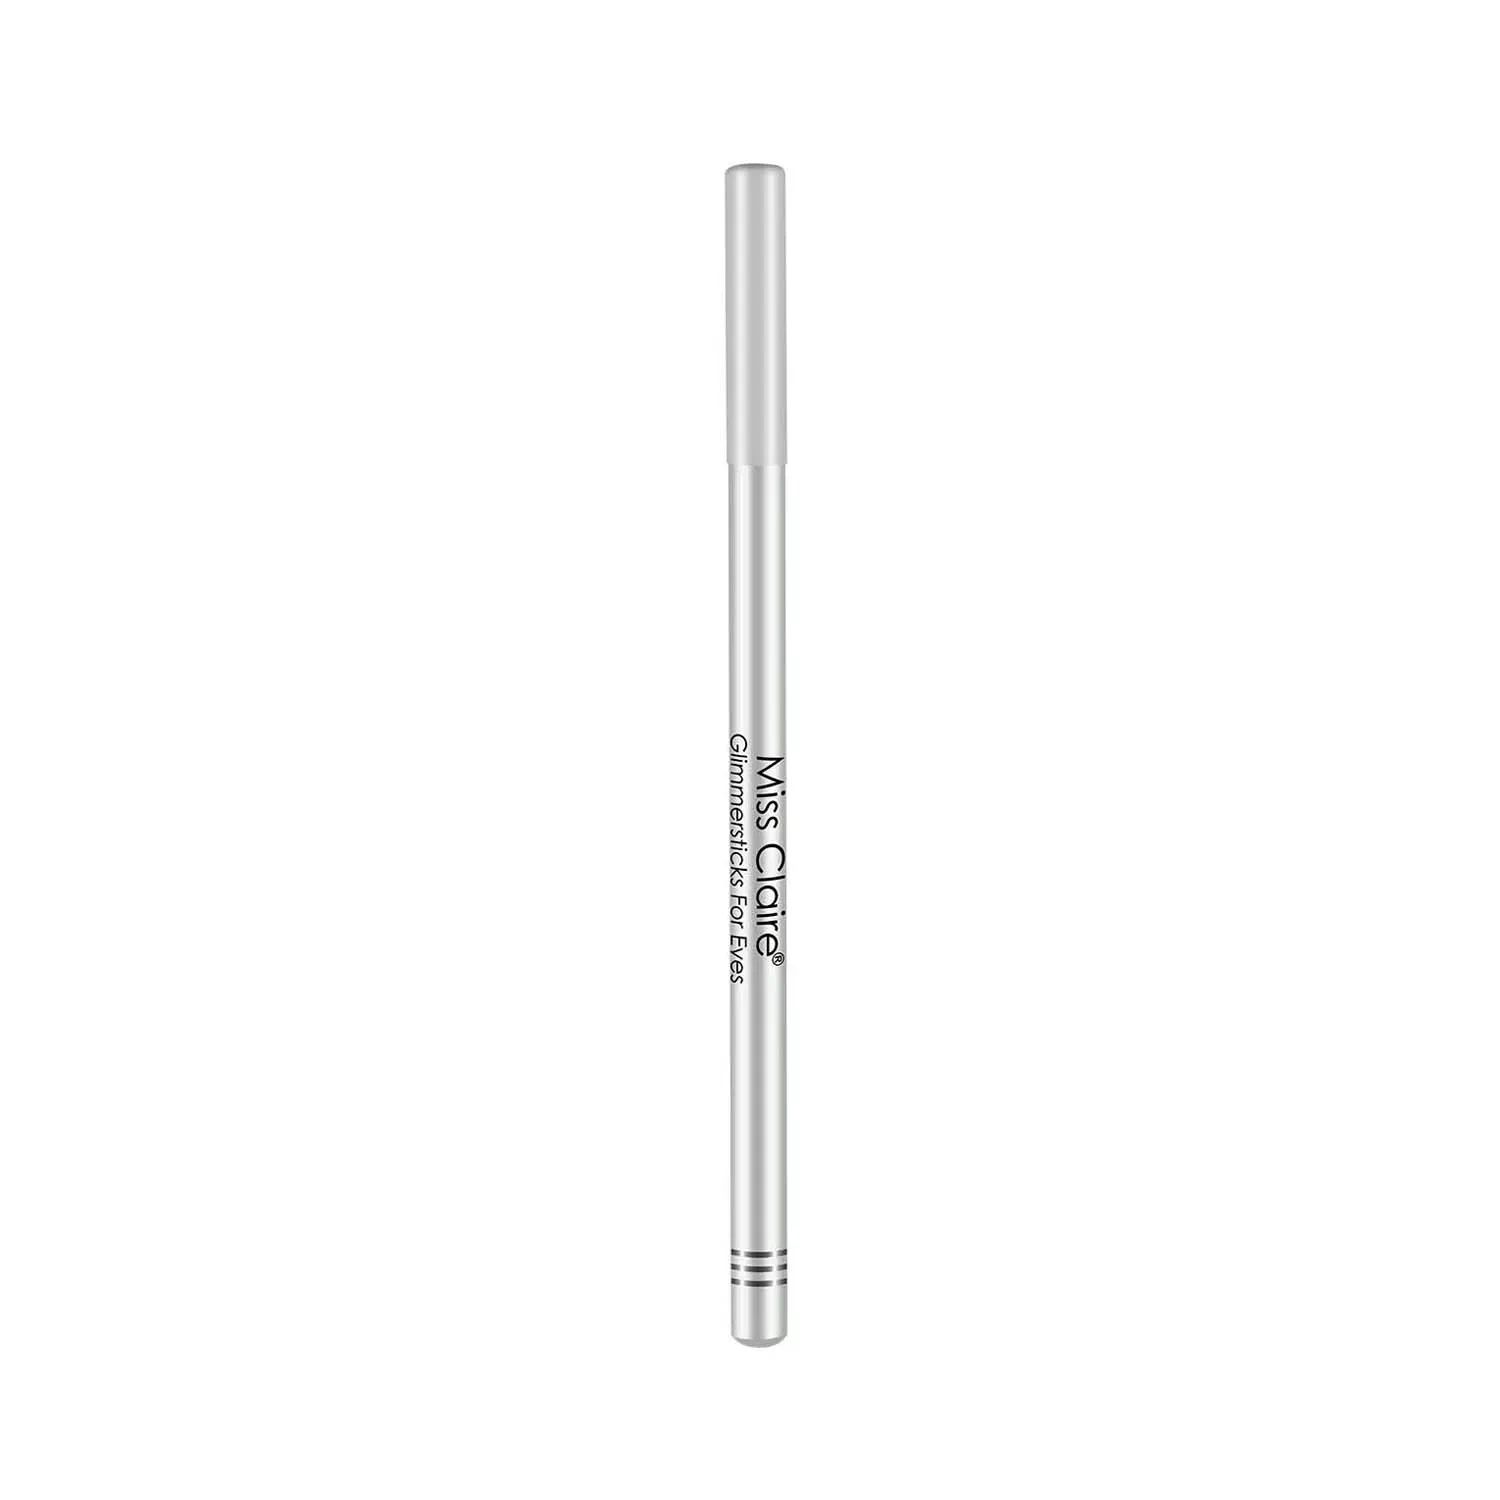 Miss Claire Glimmersticks For Eyes - E-04 Silky Silver (1.8g)